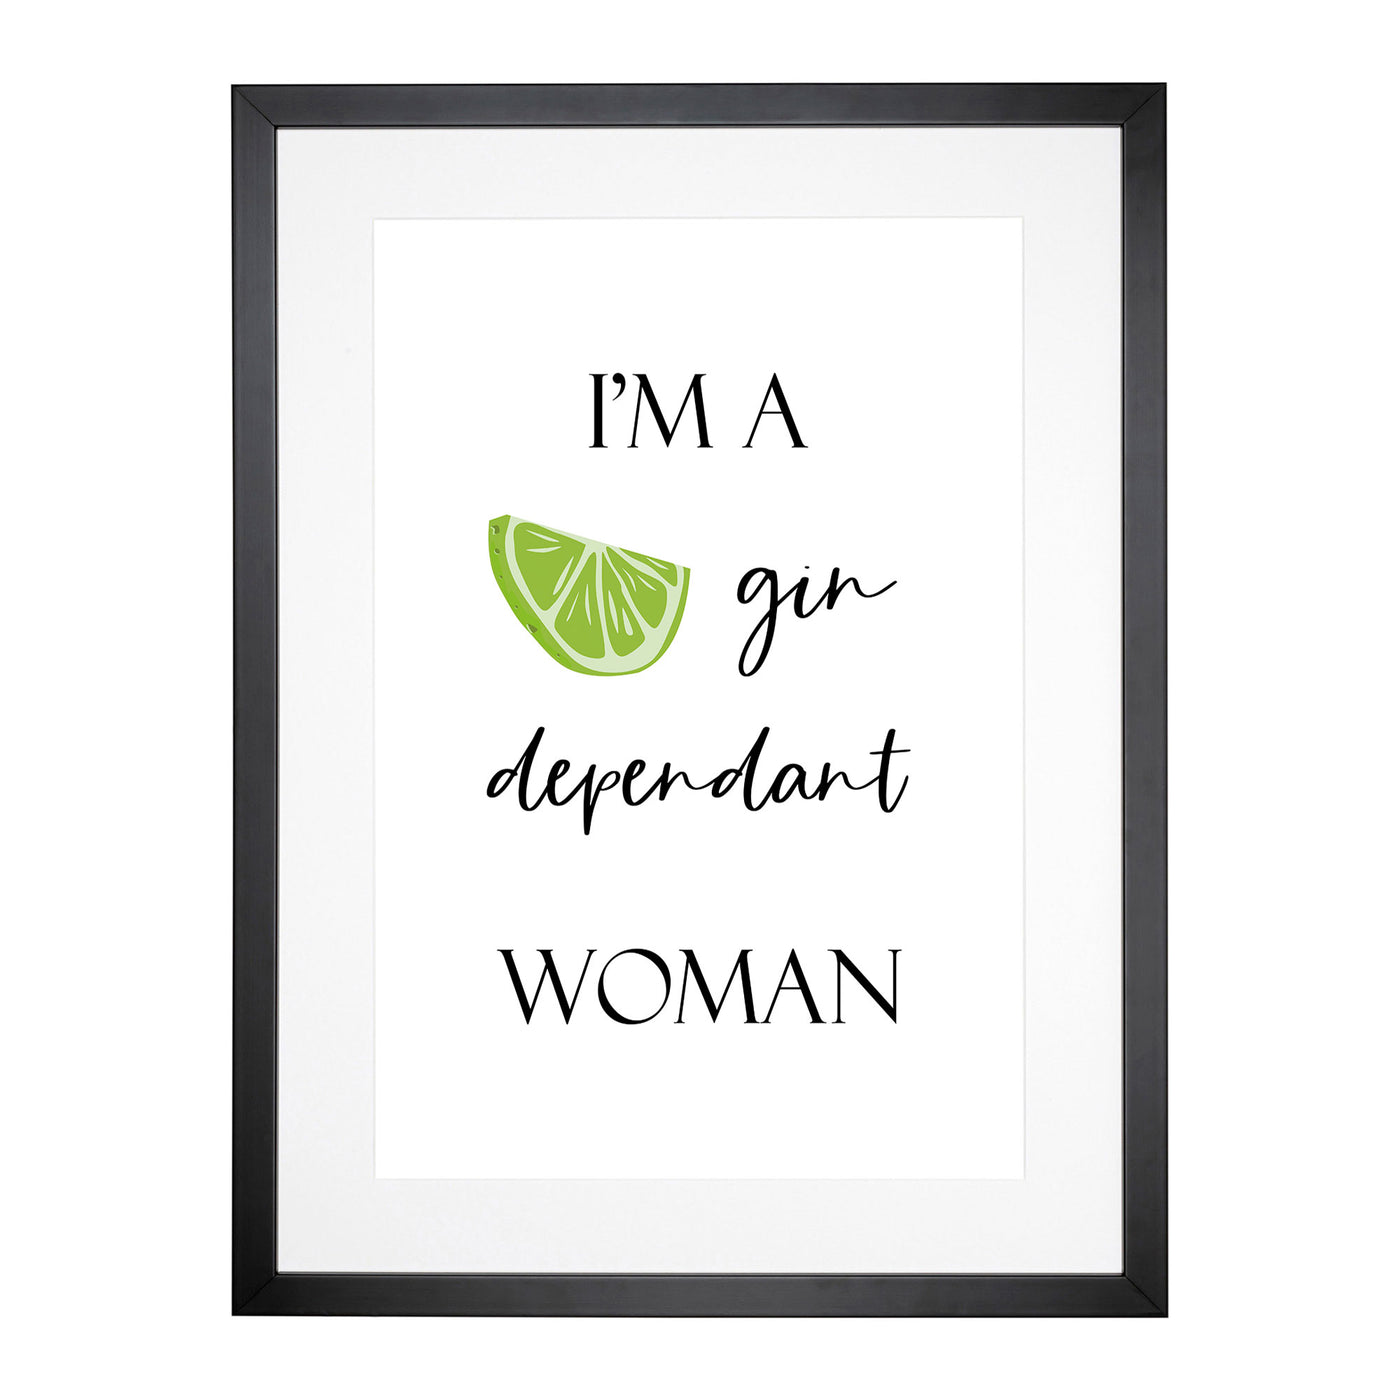 Gin Dependant Woman Typography Framed Print Main Image